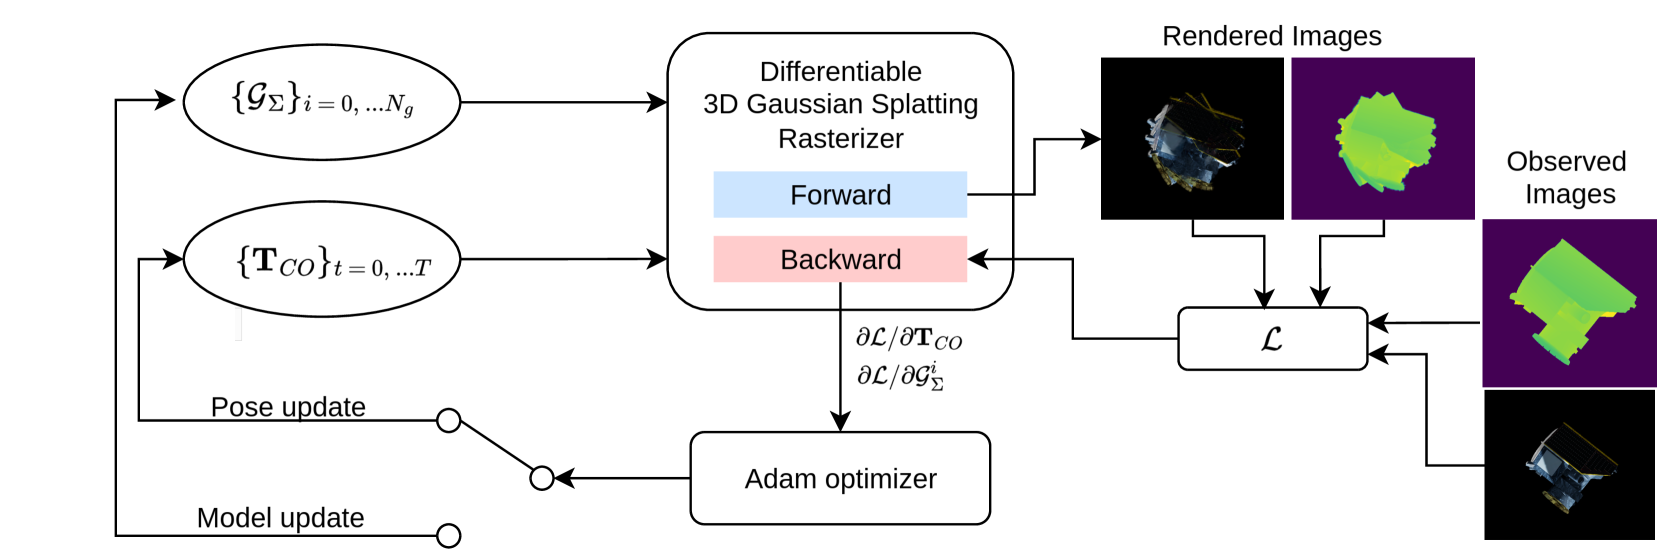 Object-centric Reconstruction and Tracking of Dynamic Unknown Objects using 3D Gaussian Splatting